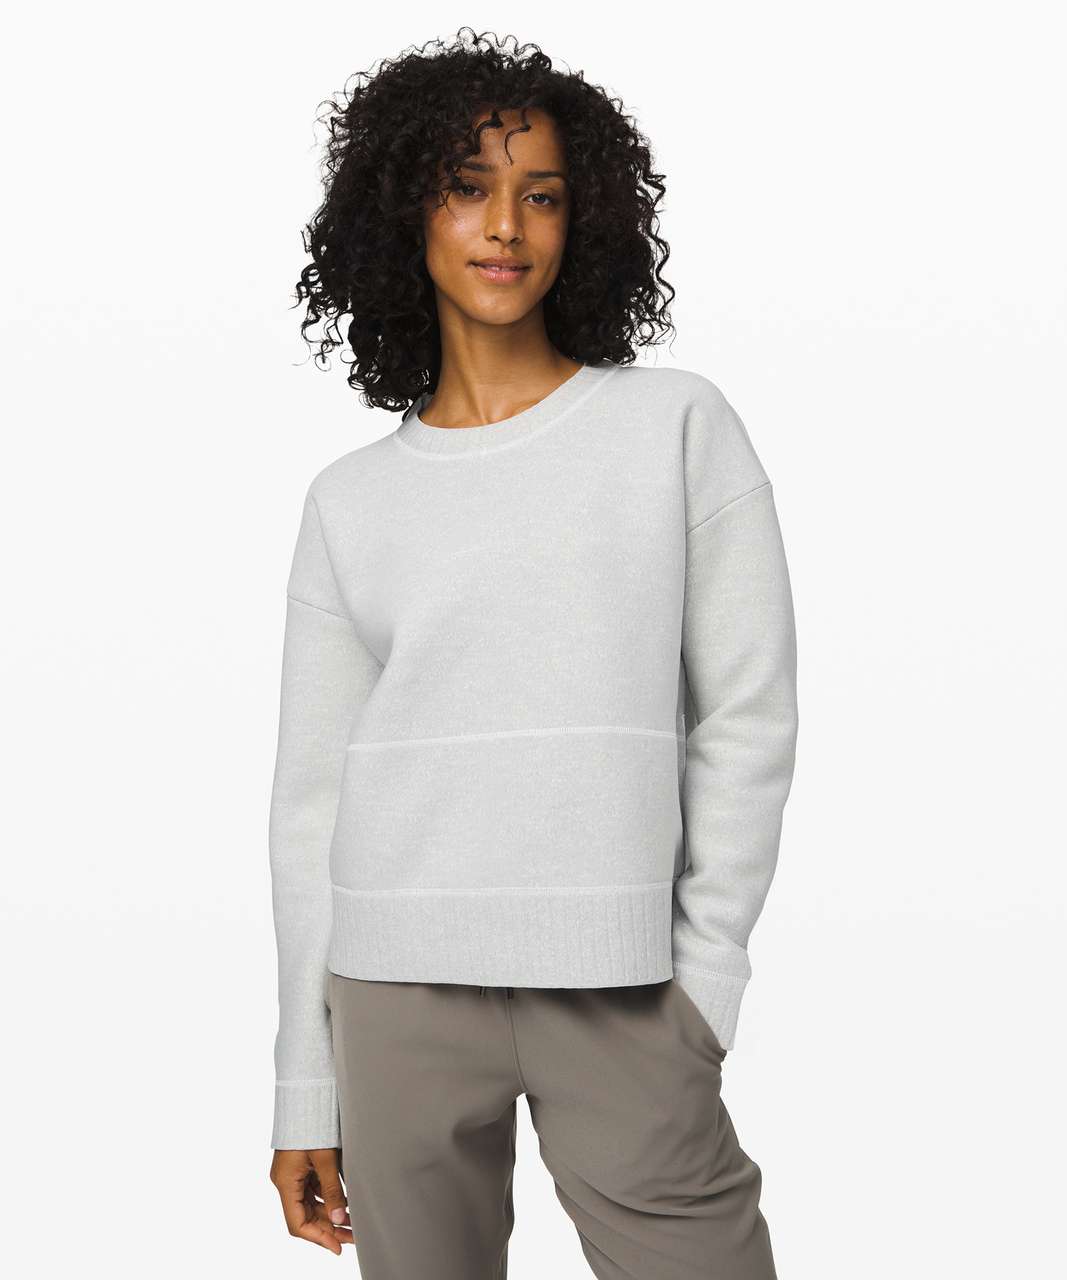 Lululemon All Afternoon Sweater - Heathered Speckled Black / White